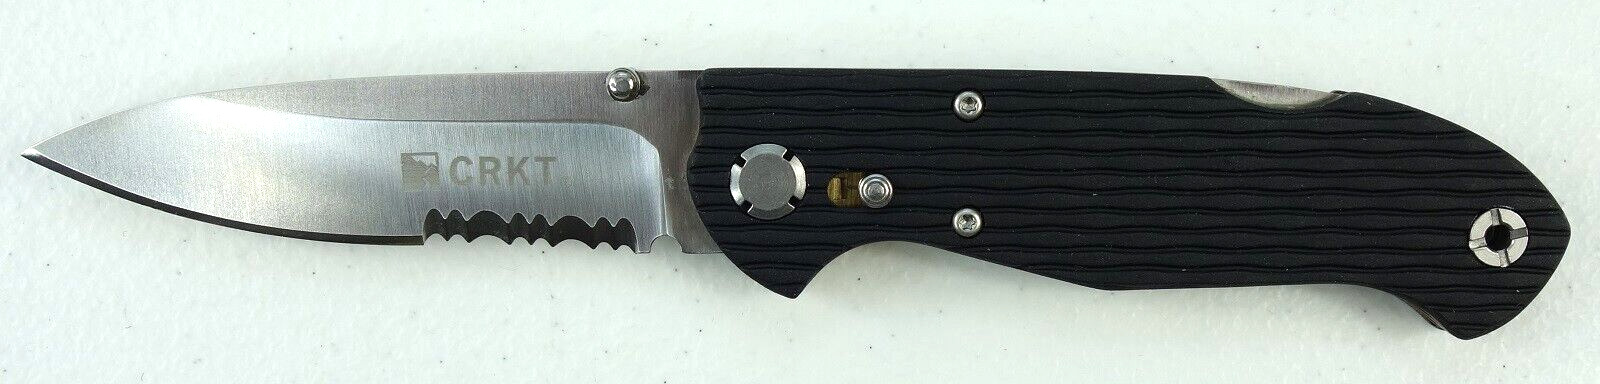 Rare Discontinued CRKT Lake 111 7256 Safety Lock Folding Knife Aluminum Scales